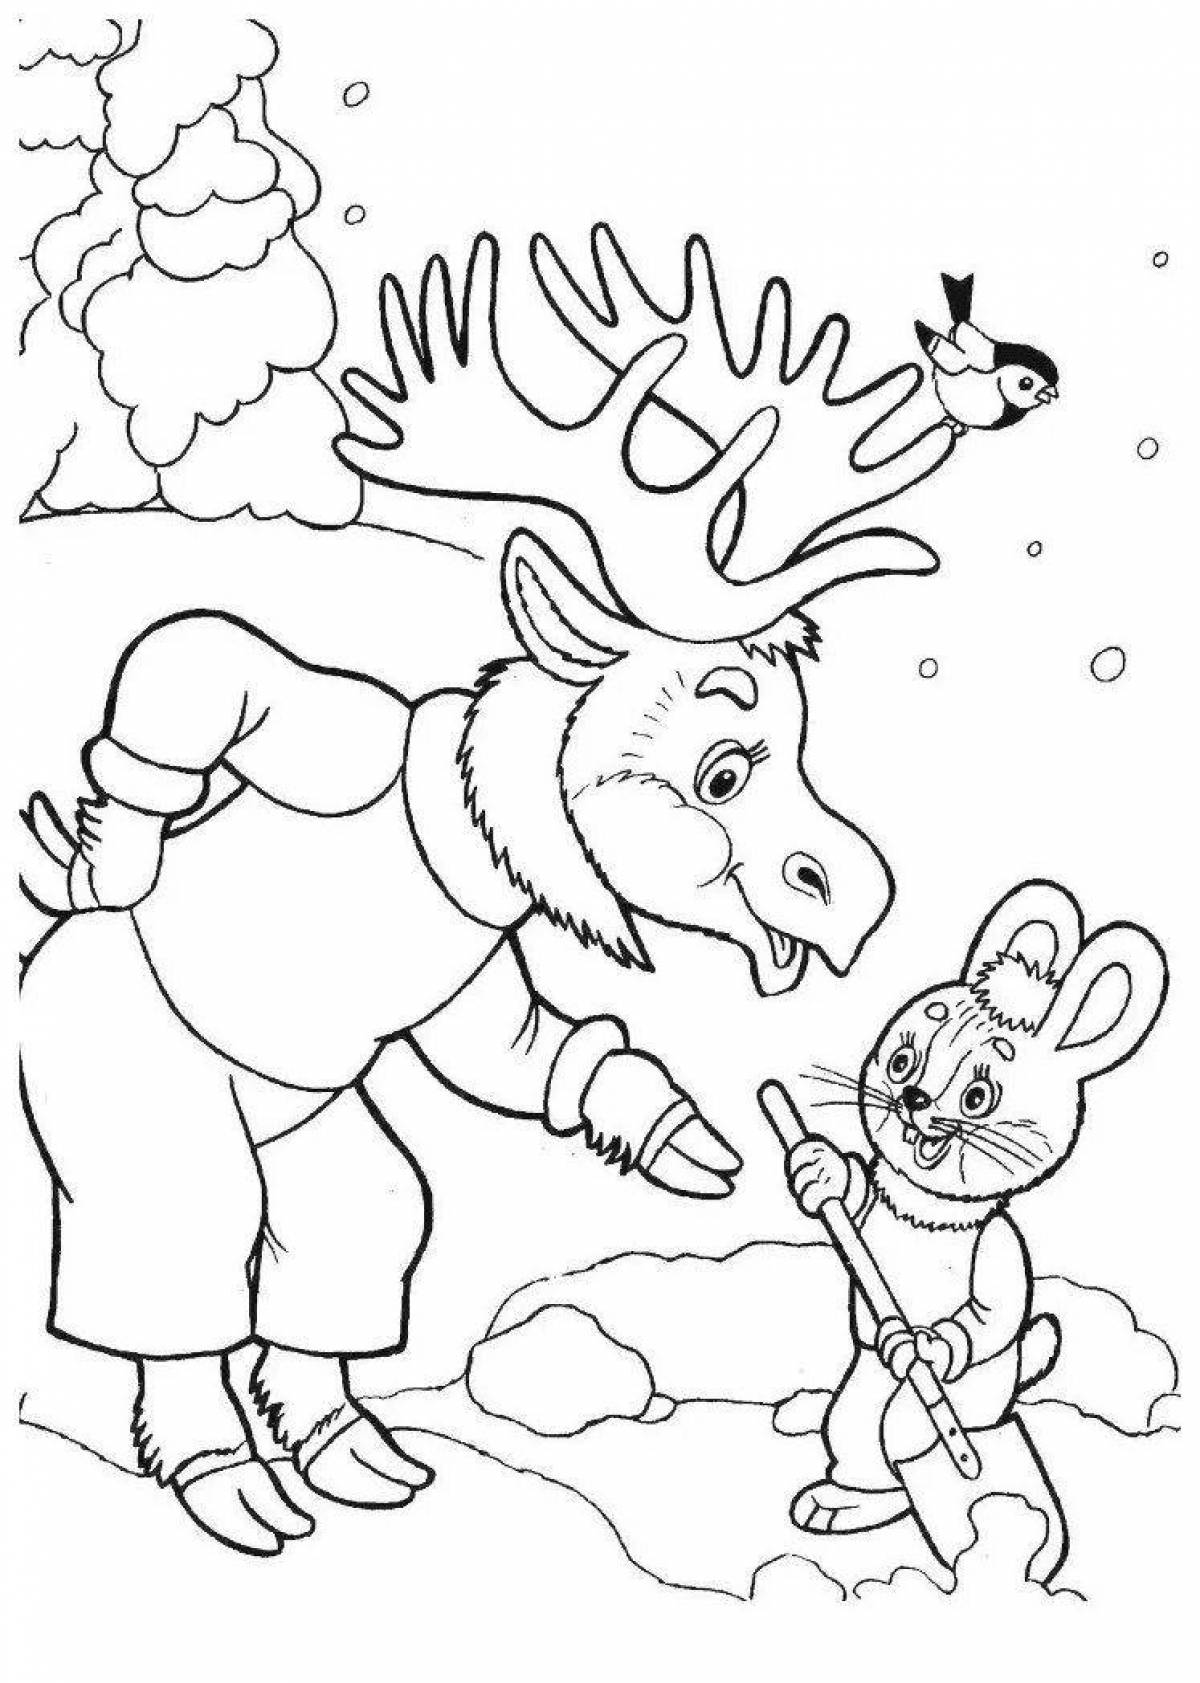 Colourful animal coloring pages for kids in winter